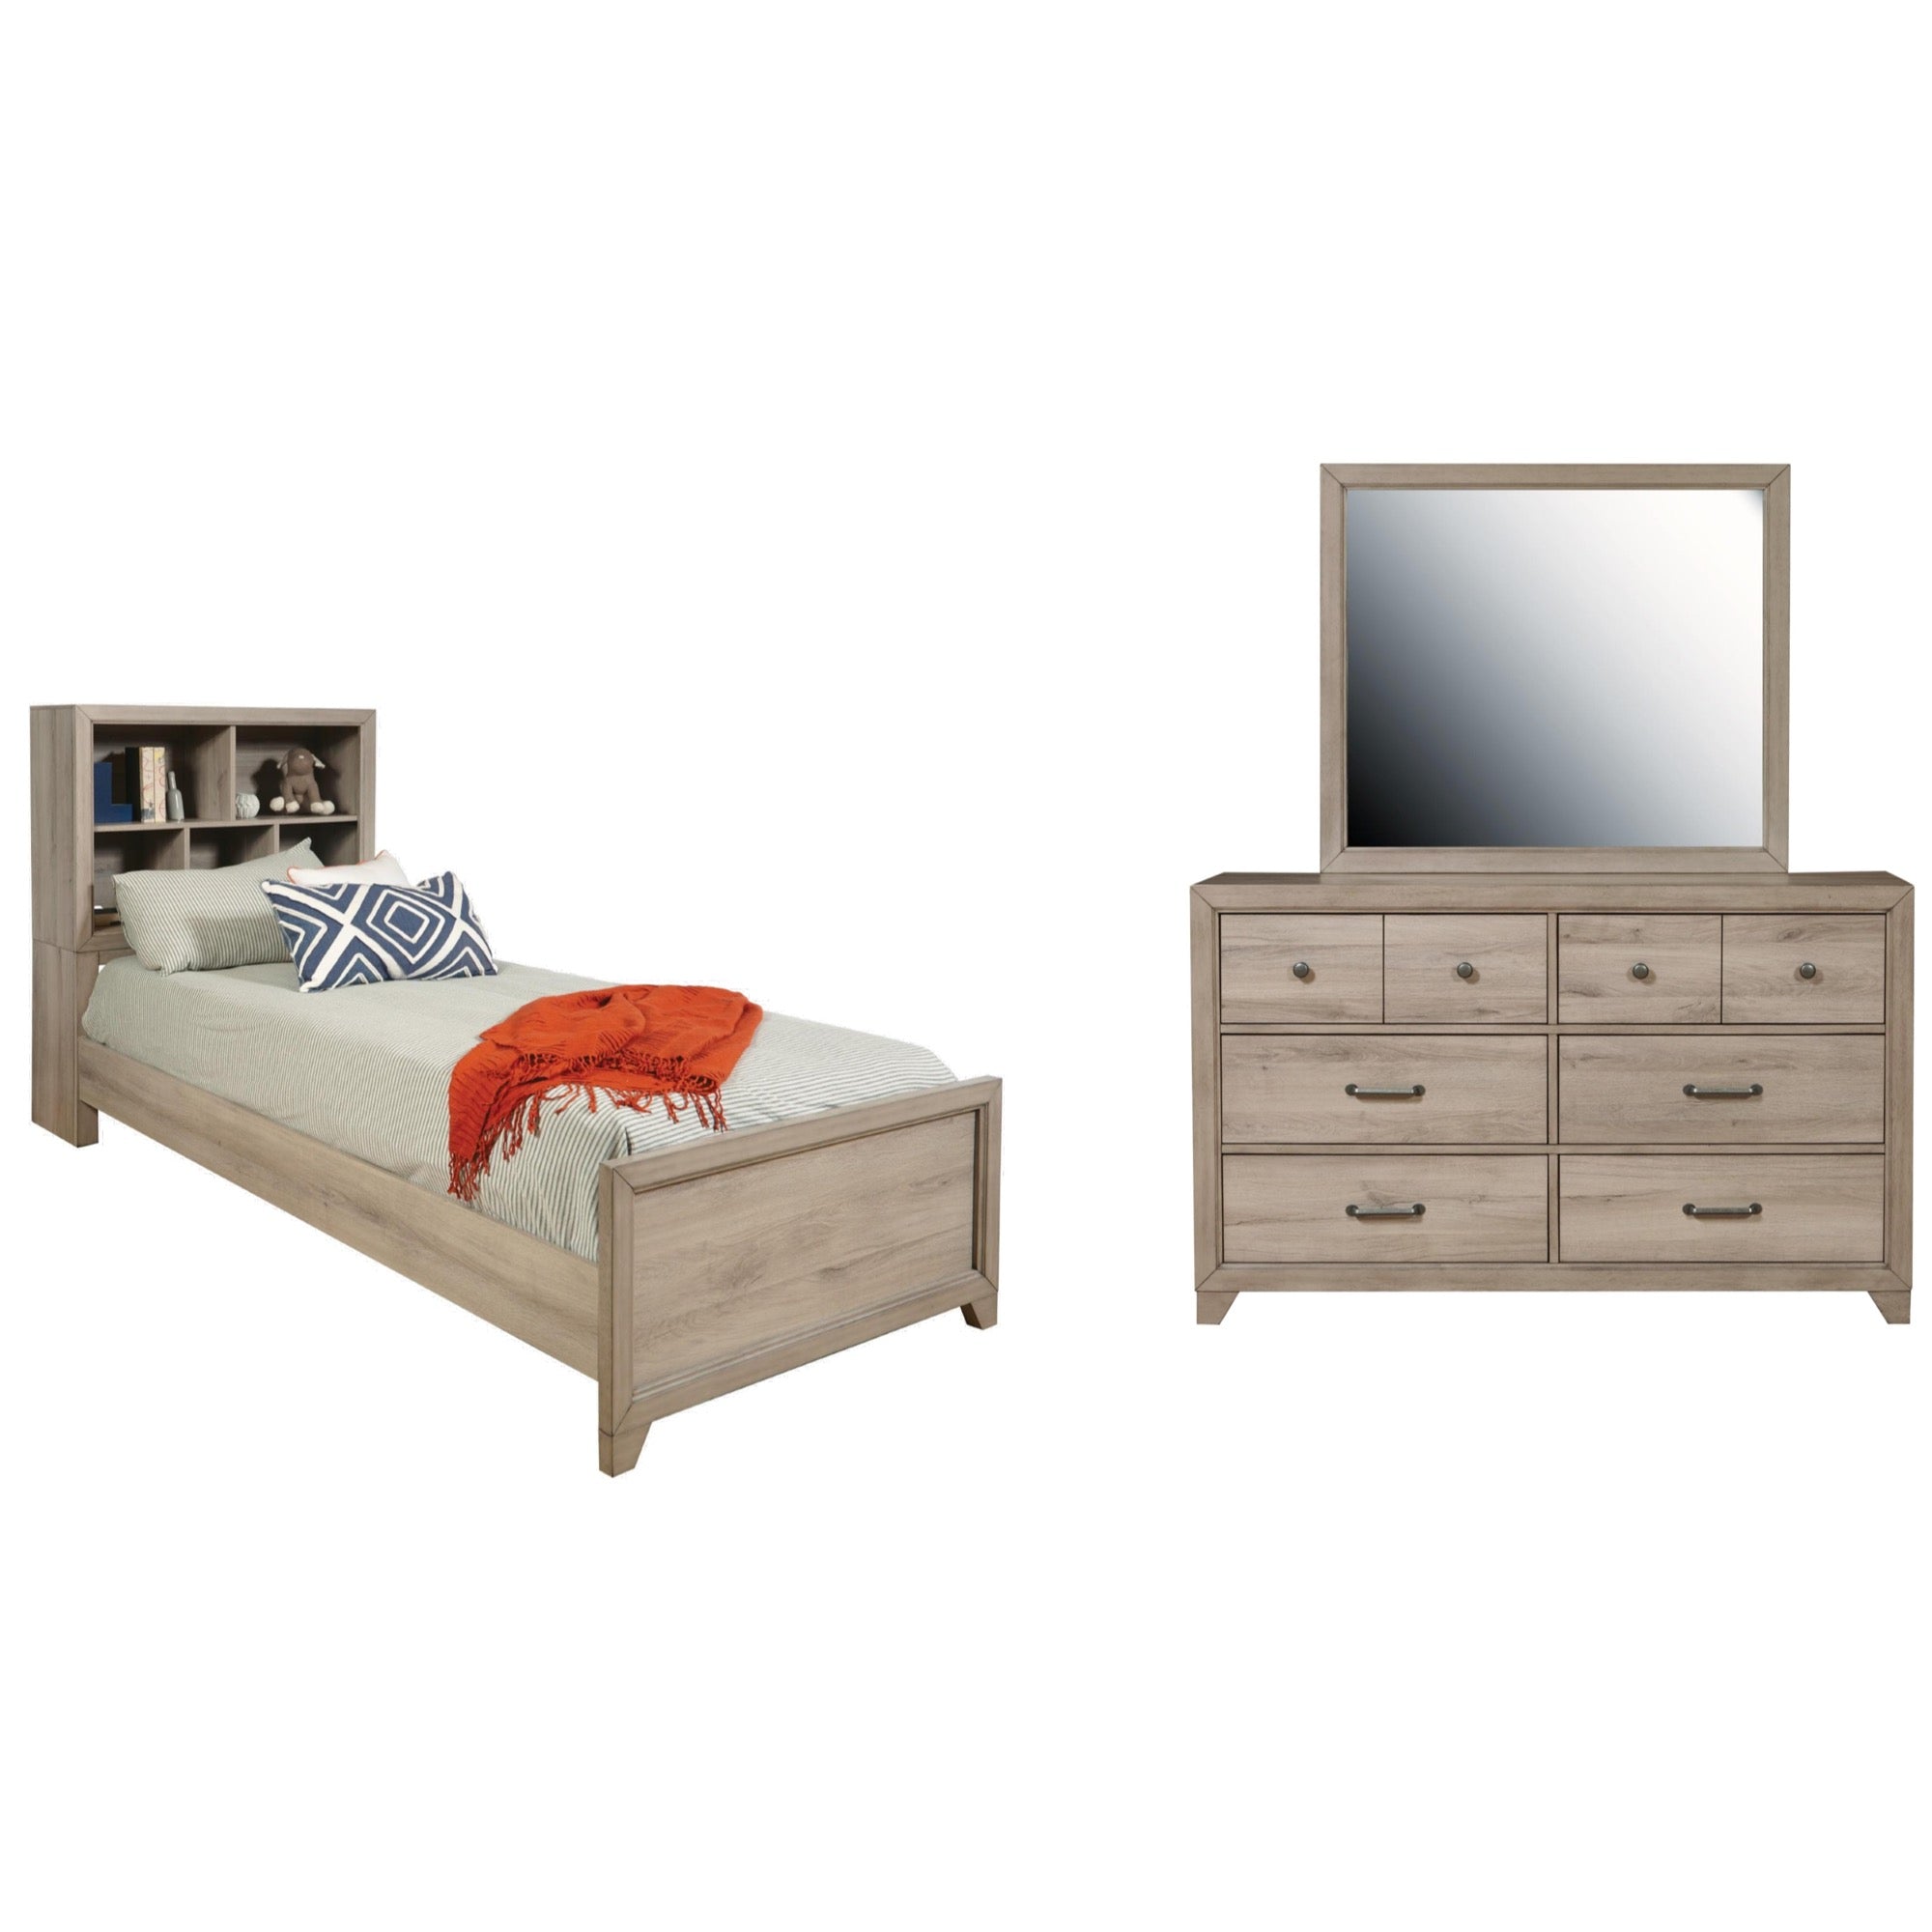 River Creek Twin 3 Piece Bedroom Set With Trundle